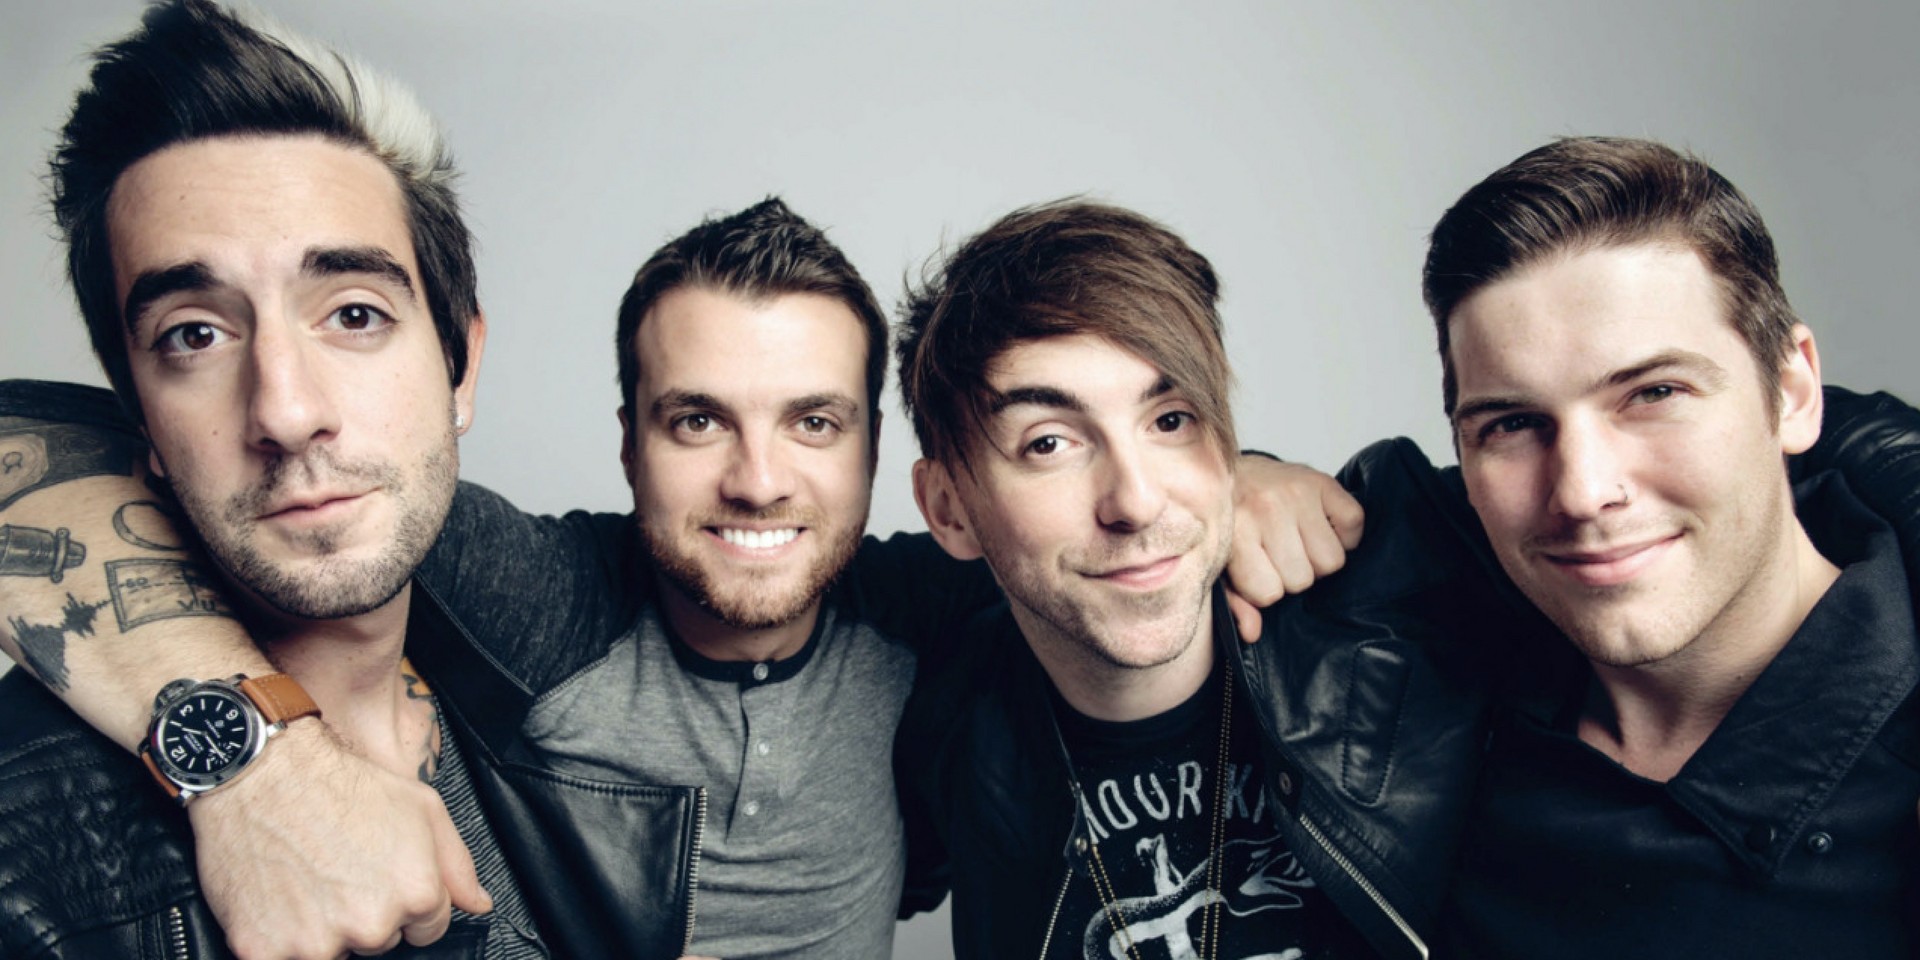 Attention All-Time Low fans, there's a Straight To DVD II screening party coming soon at CATO